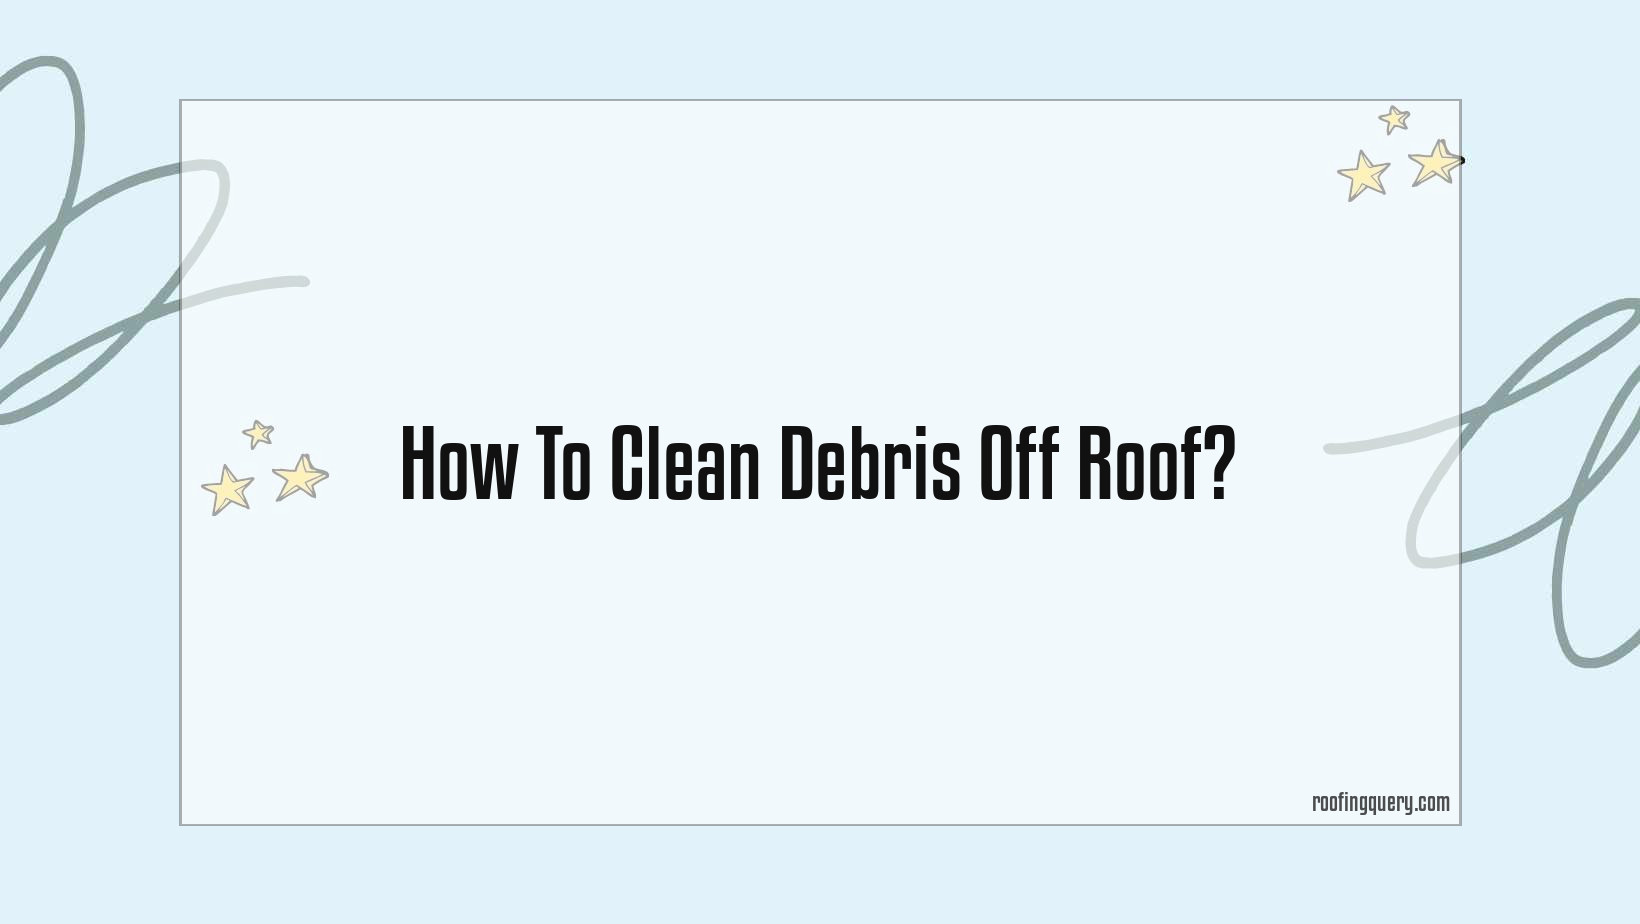 How To Clean Debris Off Roof?